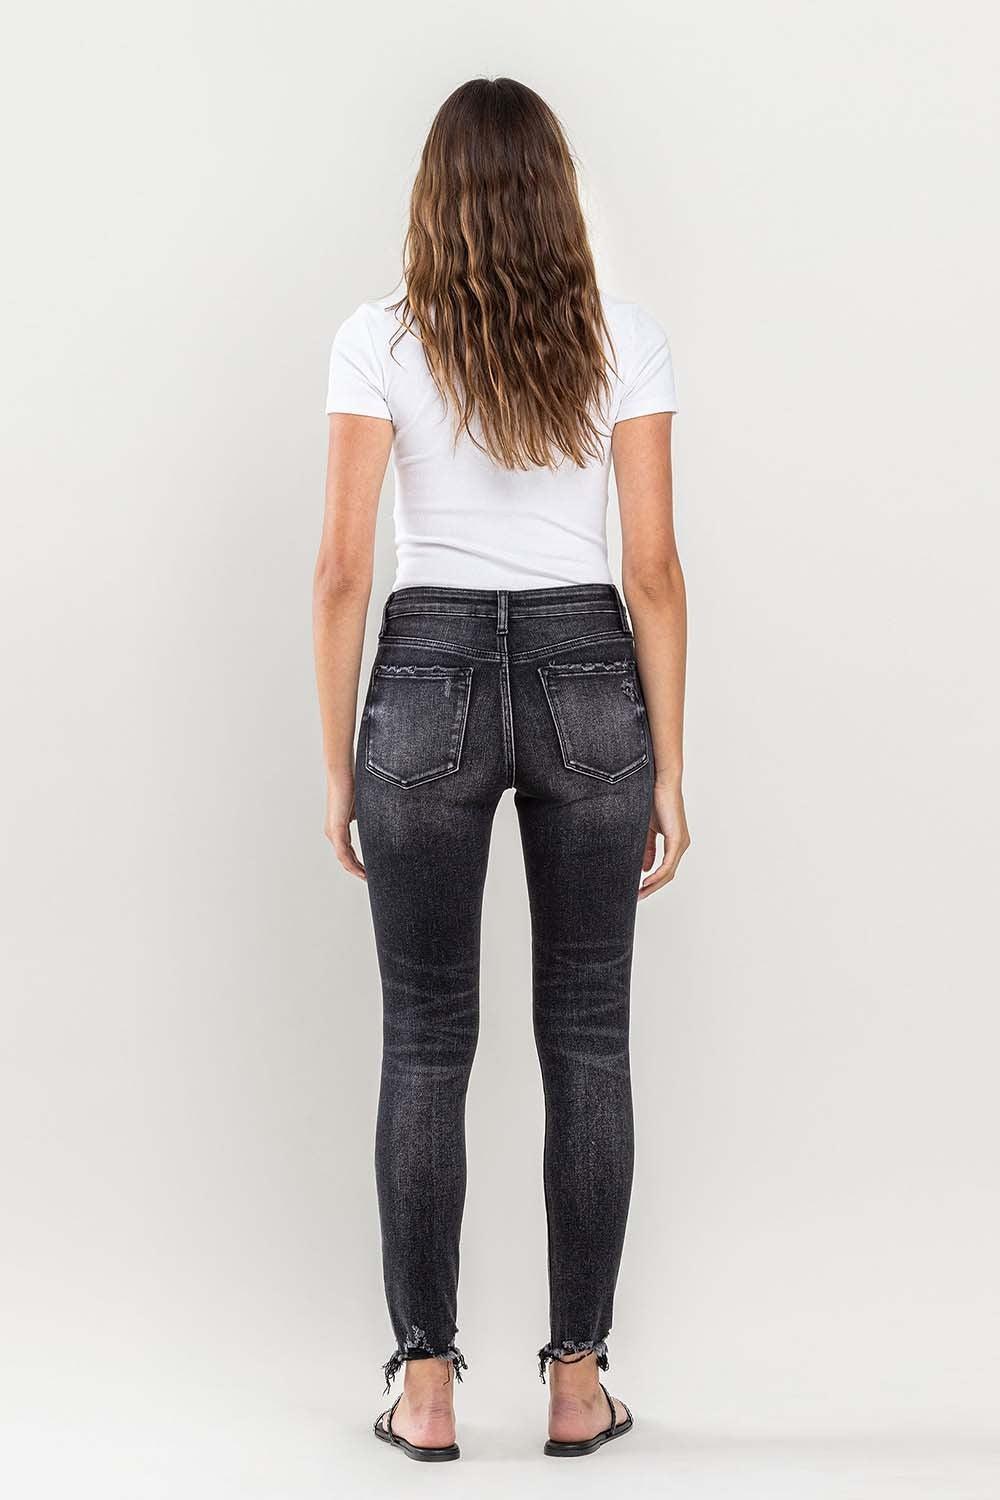 the back of a woman in black jeans